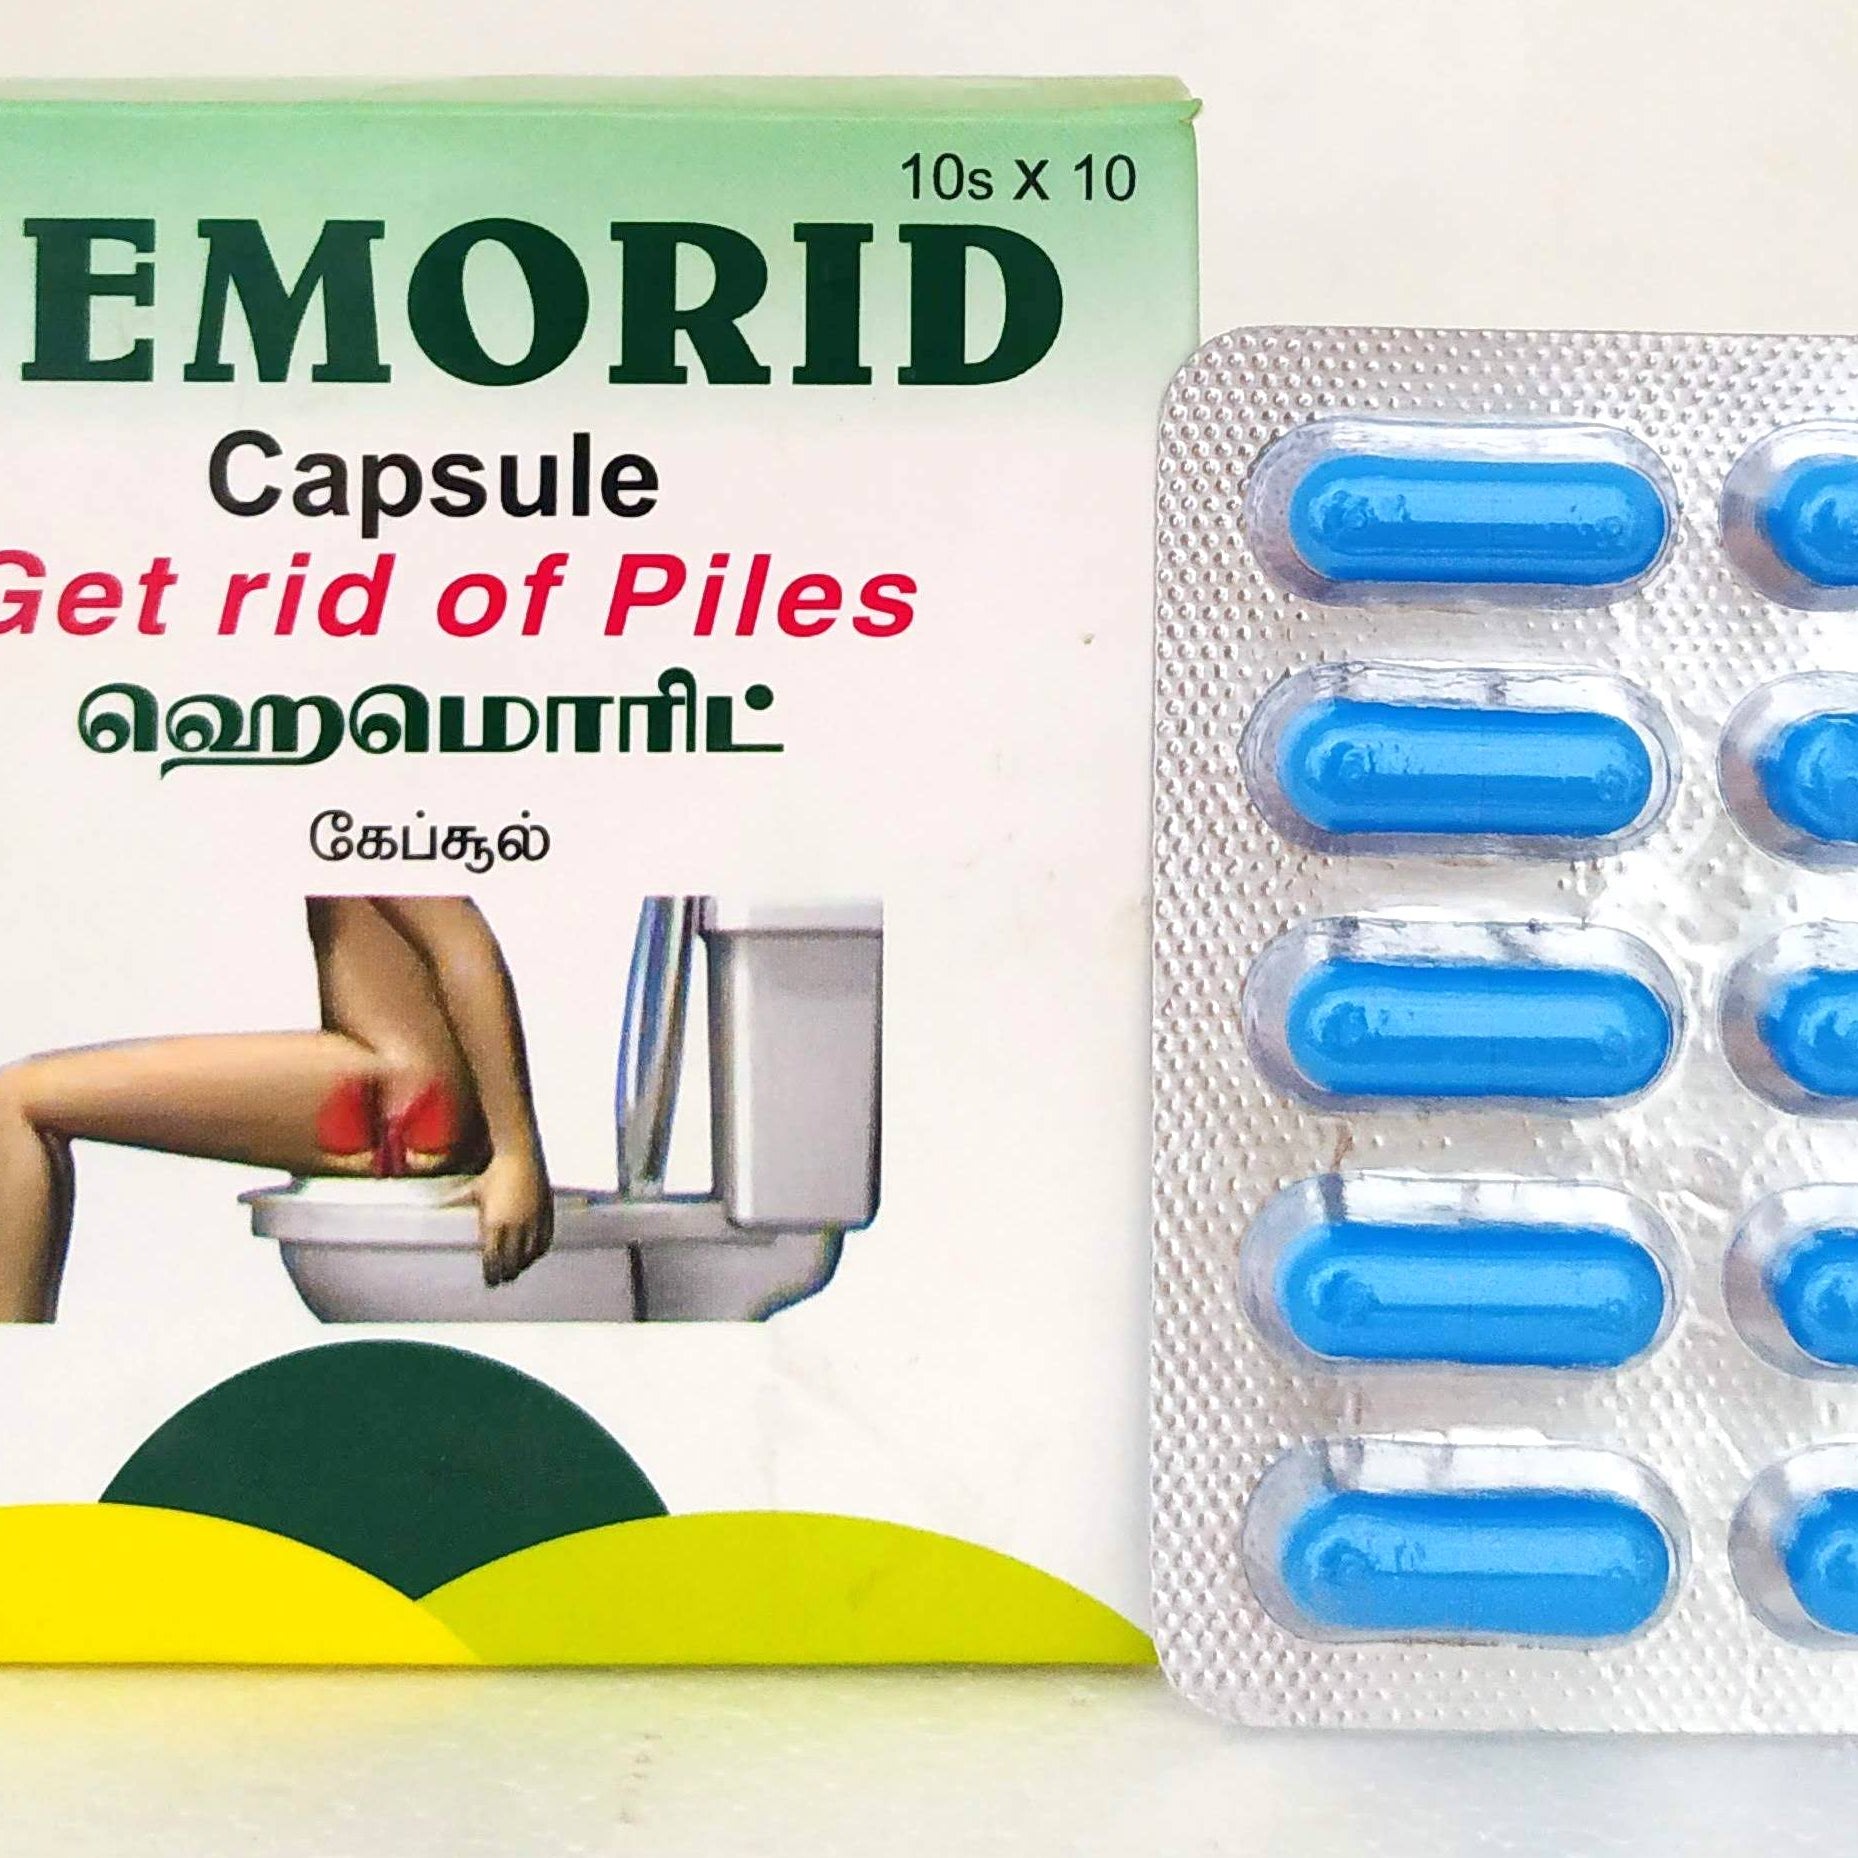 Shop Hemorid Capsules - 10Capsules at price 75.00 from Sathyas Online - Ayush Care